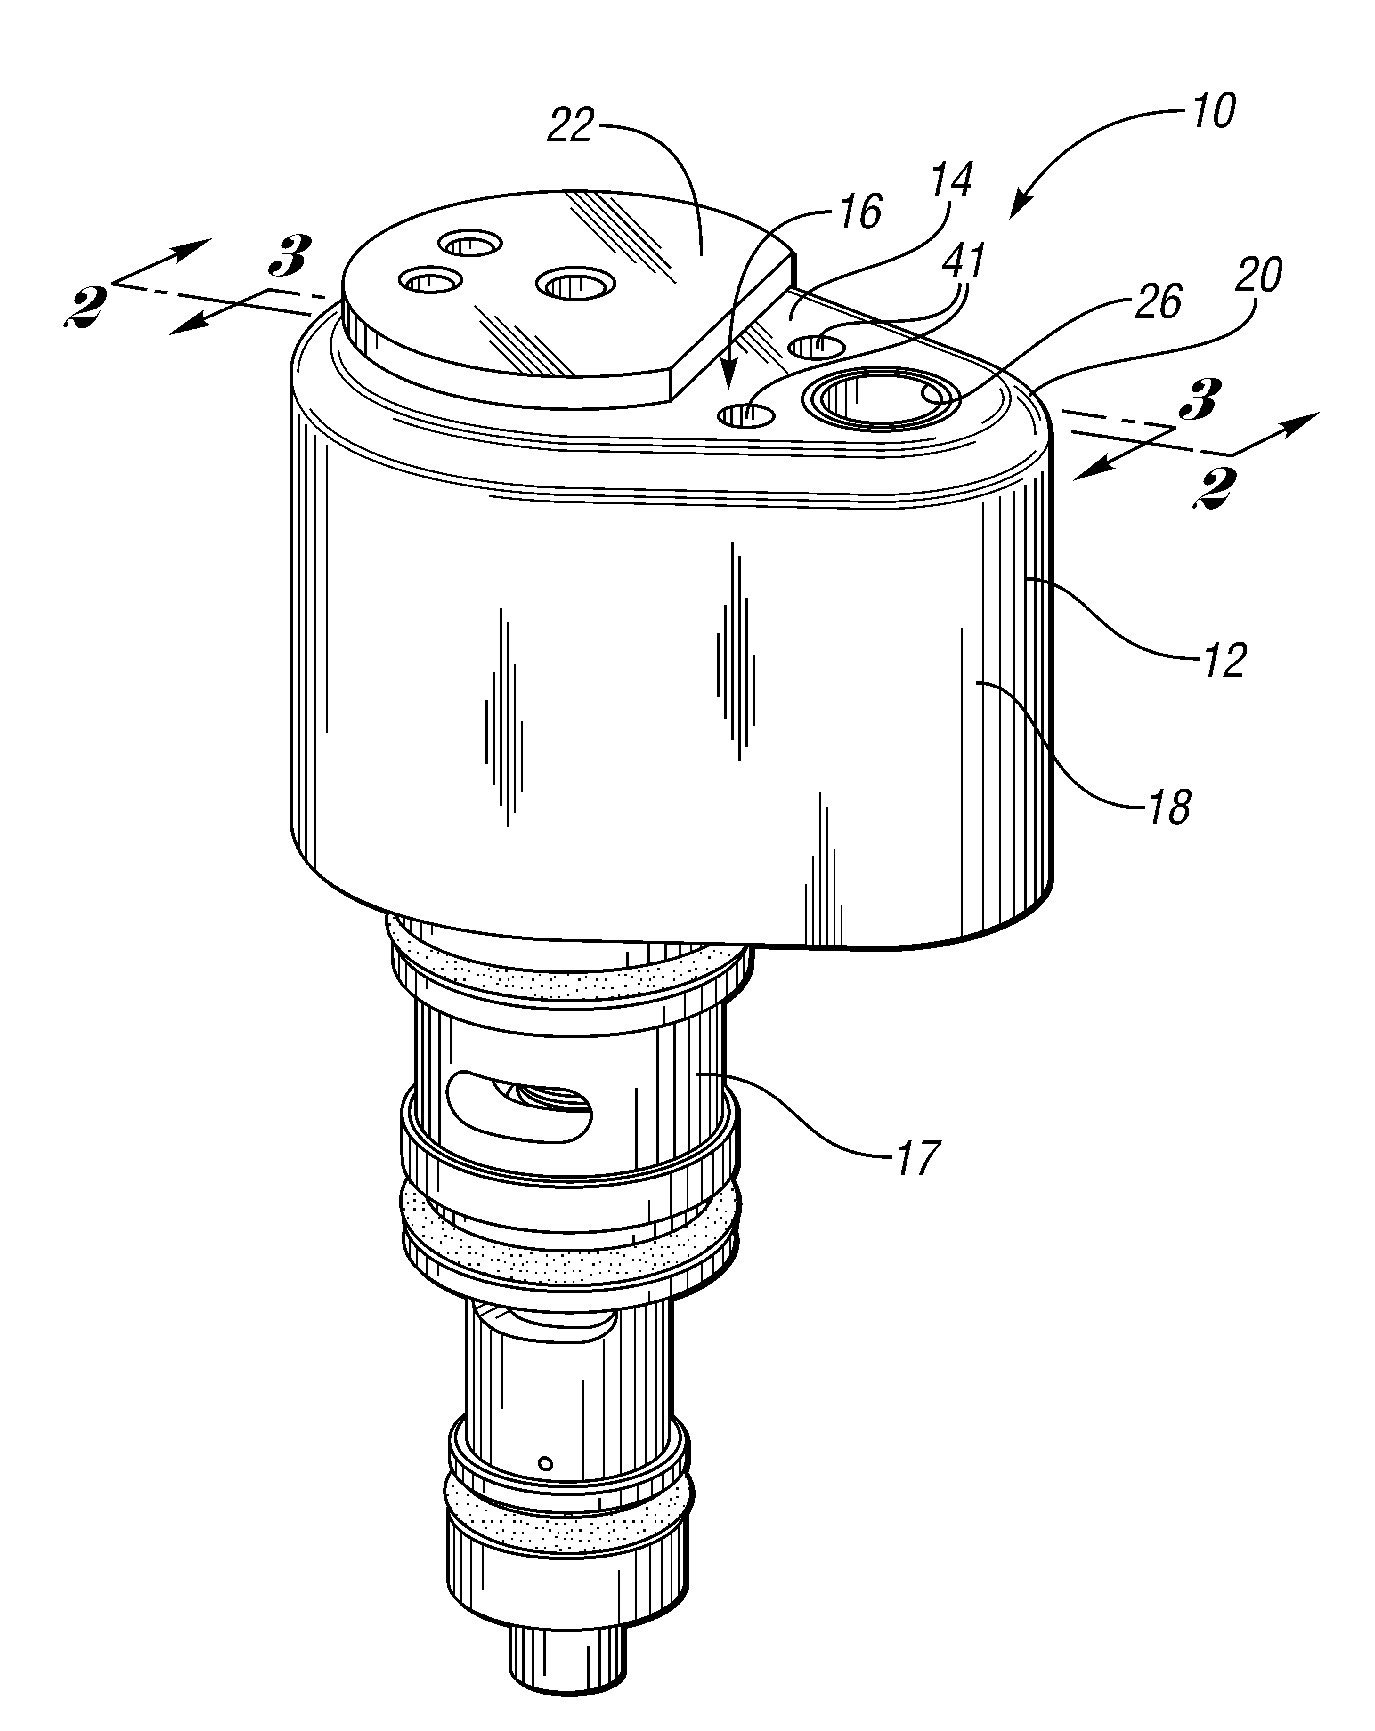 Engine valve assembly with valve can mountable to an engine cover